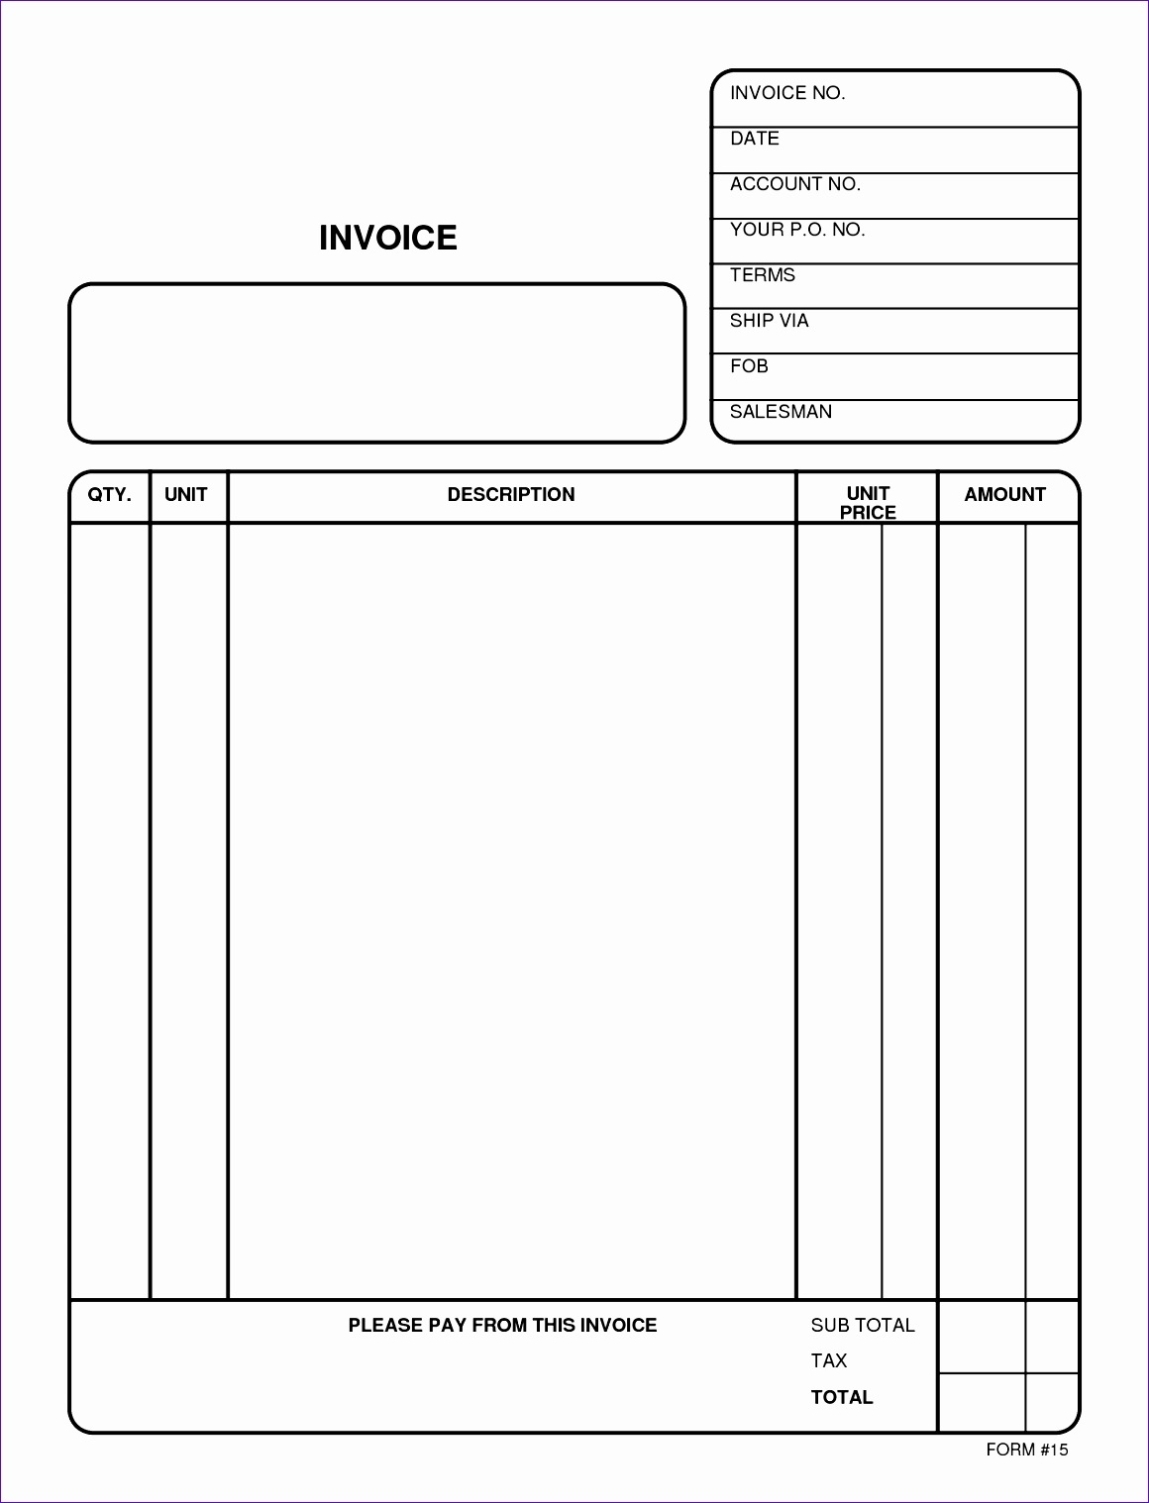 12 Rsvp List Template Excel - Excel Templates Throughout Invoice Checklist Template